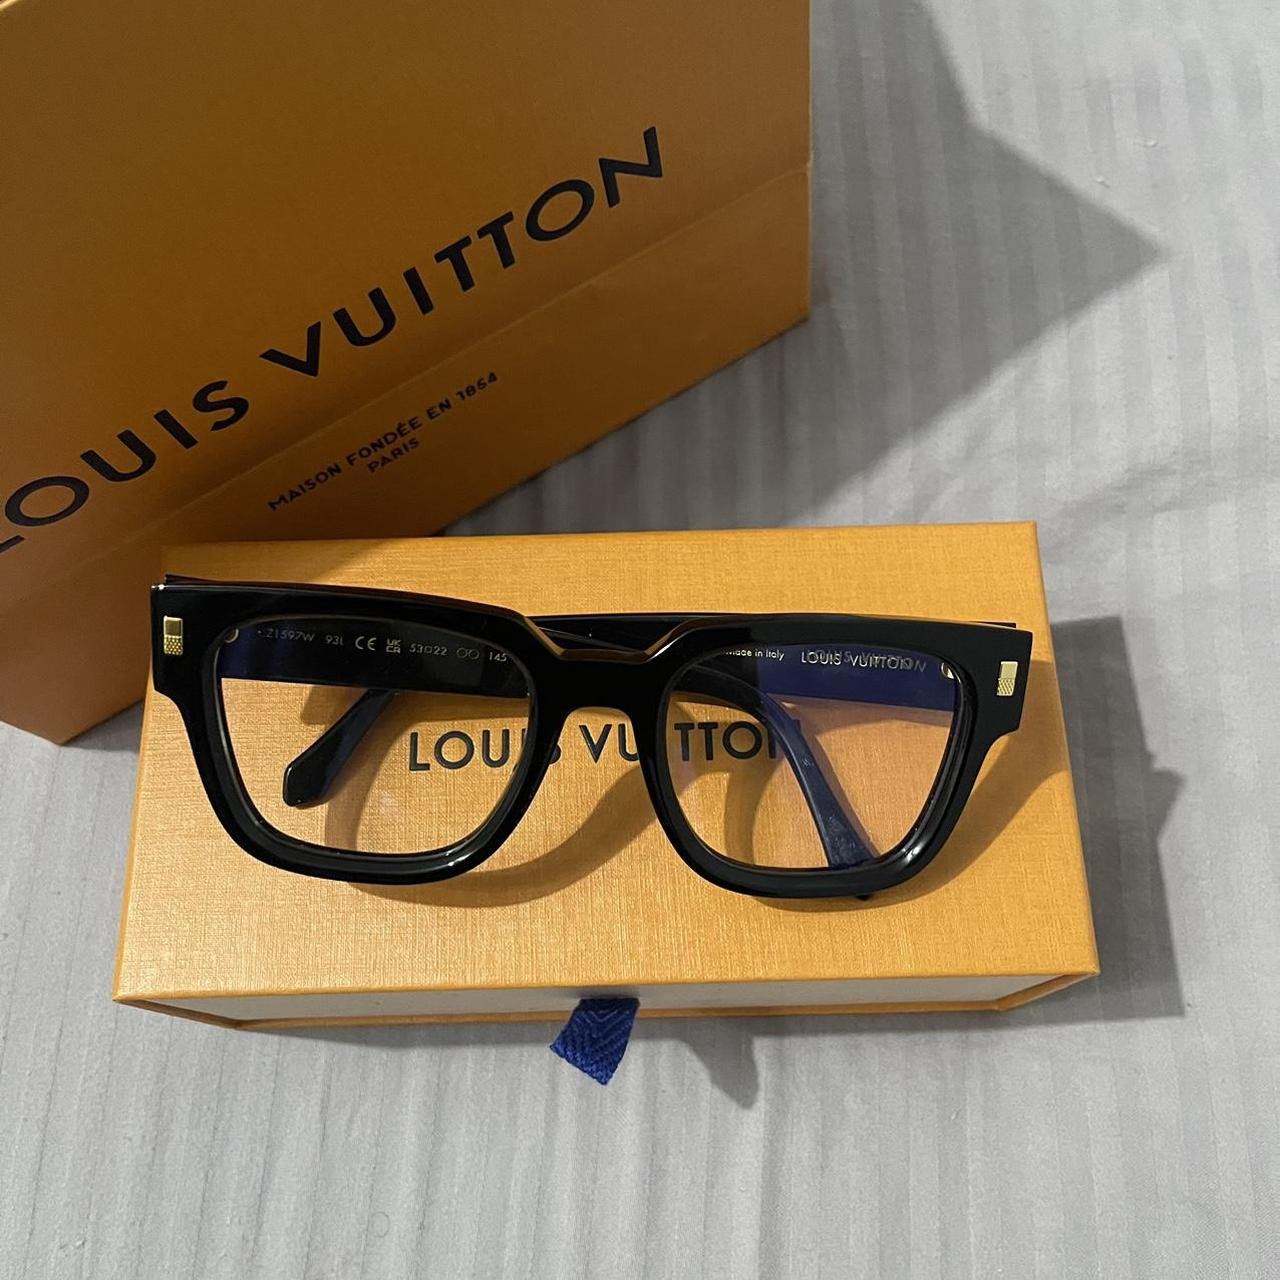 2011 Louis Vuitton Poppy Sunglasses LV Shades from - Depop